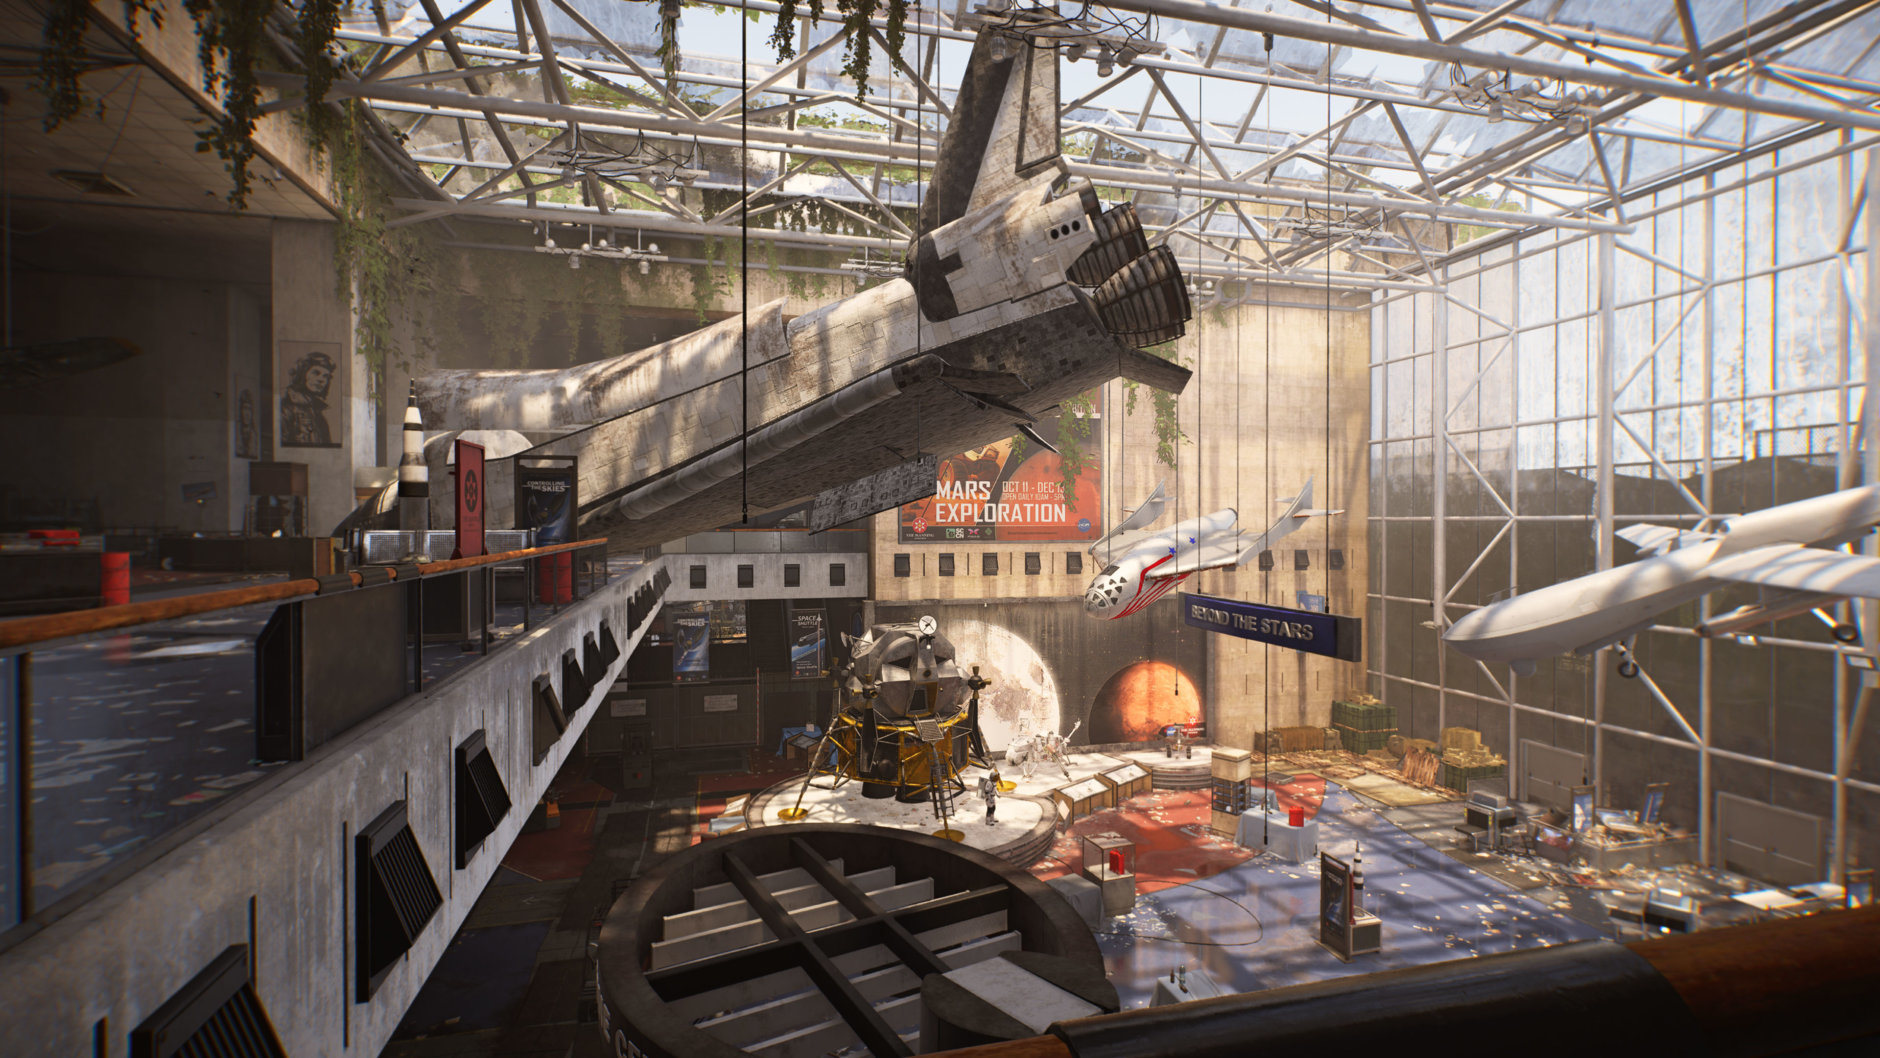 The Air and Space Museum  has been utterly wrecked in The Division 2. (Courtesy Ubisoft/Massive)